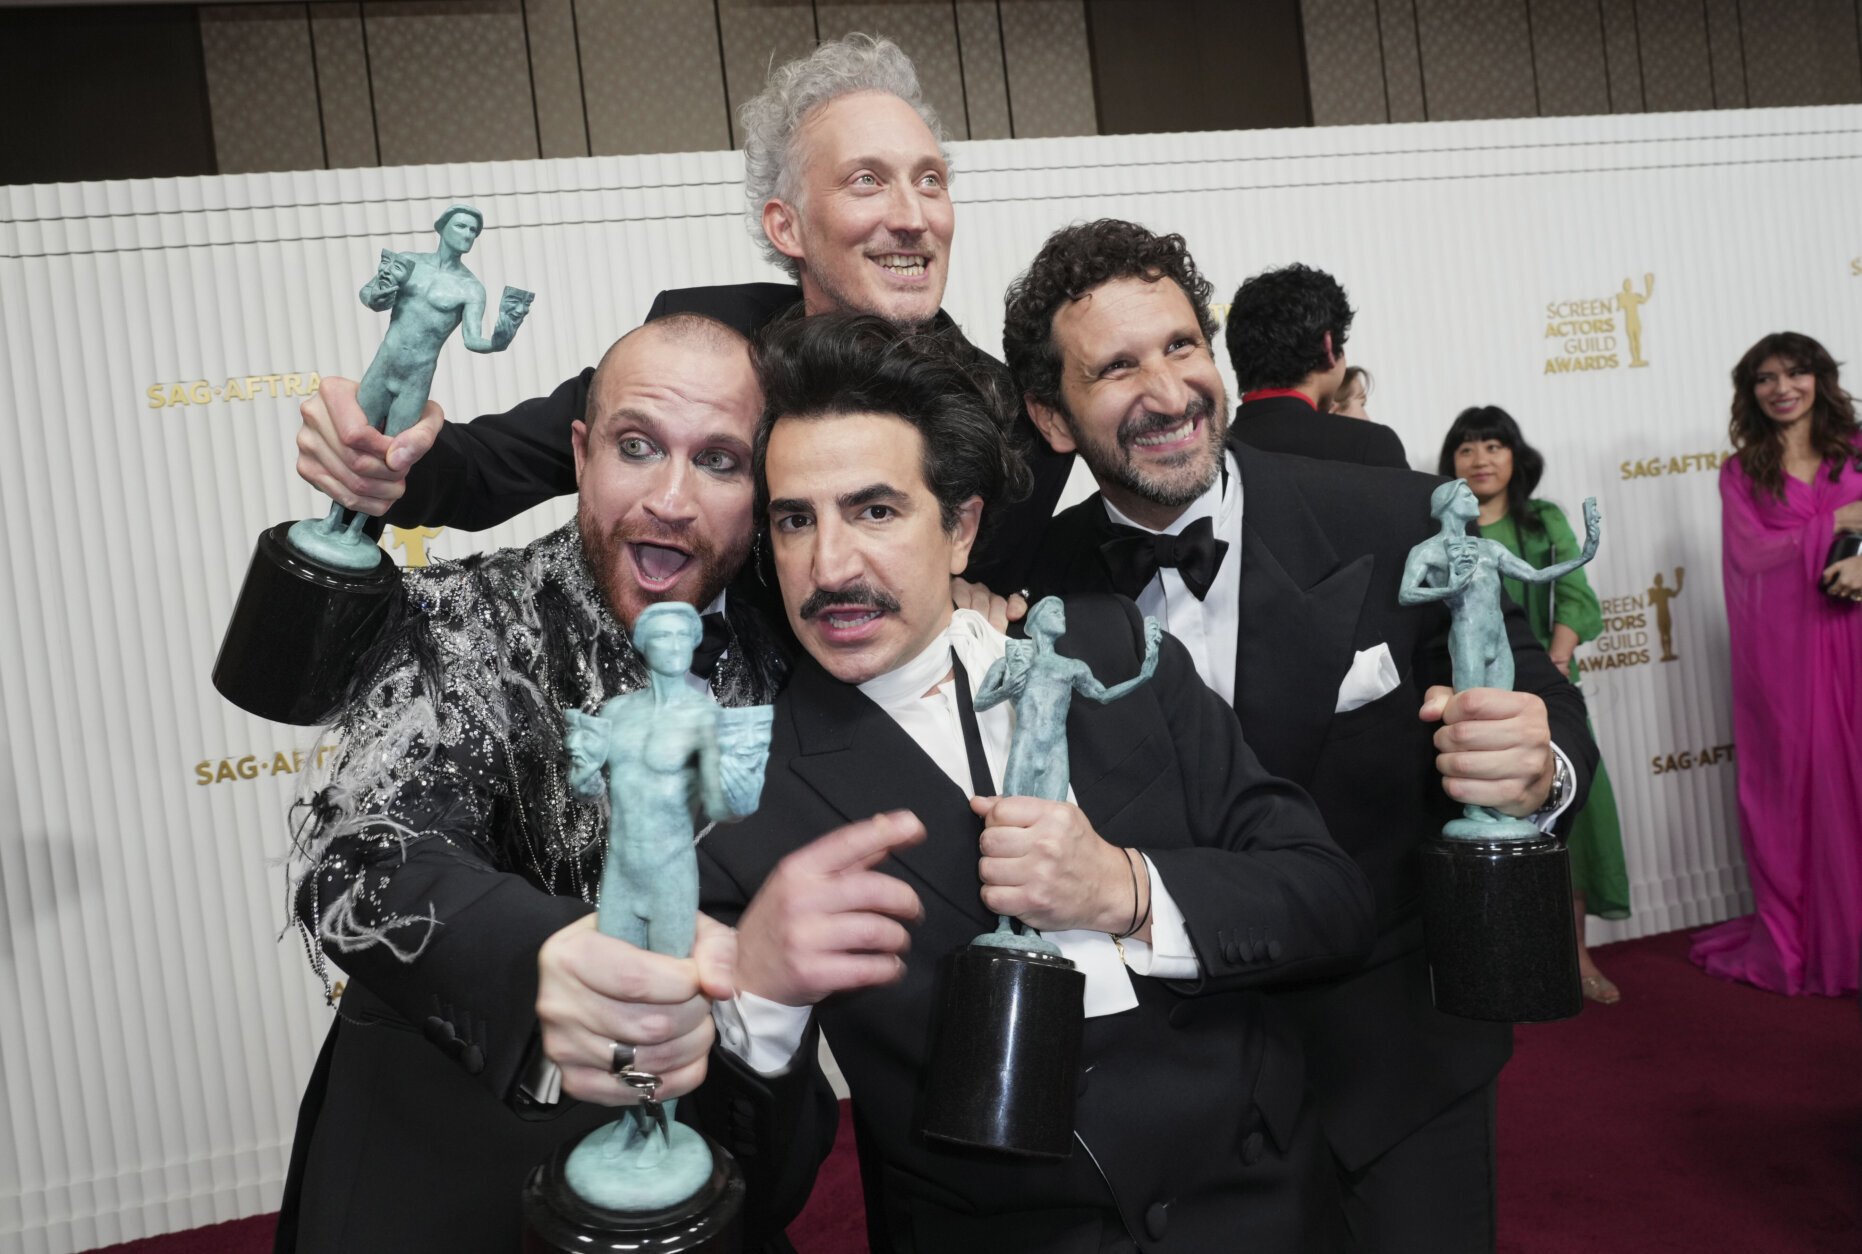 Bruno Gouery, back left, Federico Ferrante, Paolo Camilli, bottom left, and Francesco Zecca from the cast of "The White Lotus," winners of the award for outstanding performance by an ensemble in a drama series, pose in the press room at the 29th annual Screen Actors Guild Awards on Sunday, Feb. 26, 2023, at the Fairmont Century Plaza in Los Angeles. (Photo by Jordan Strauss/Invision/AP)